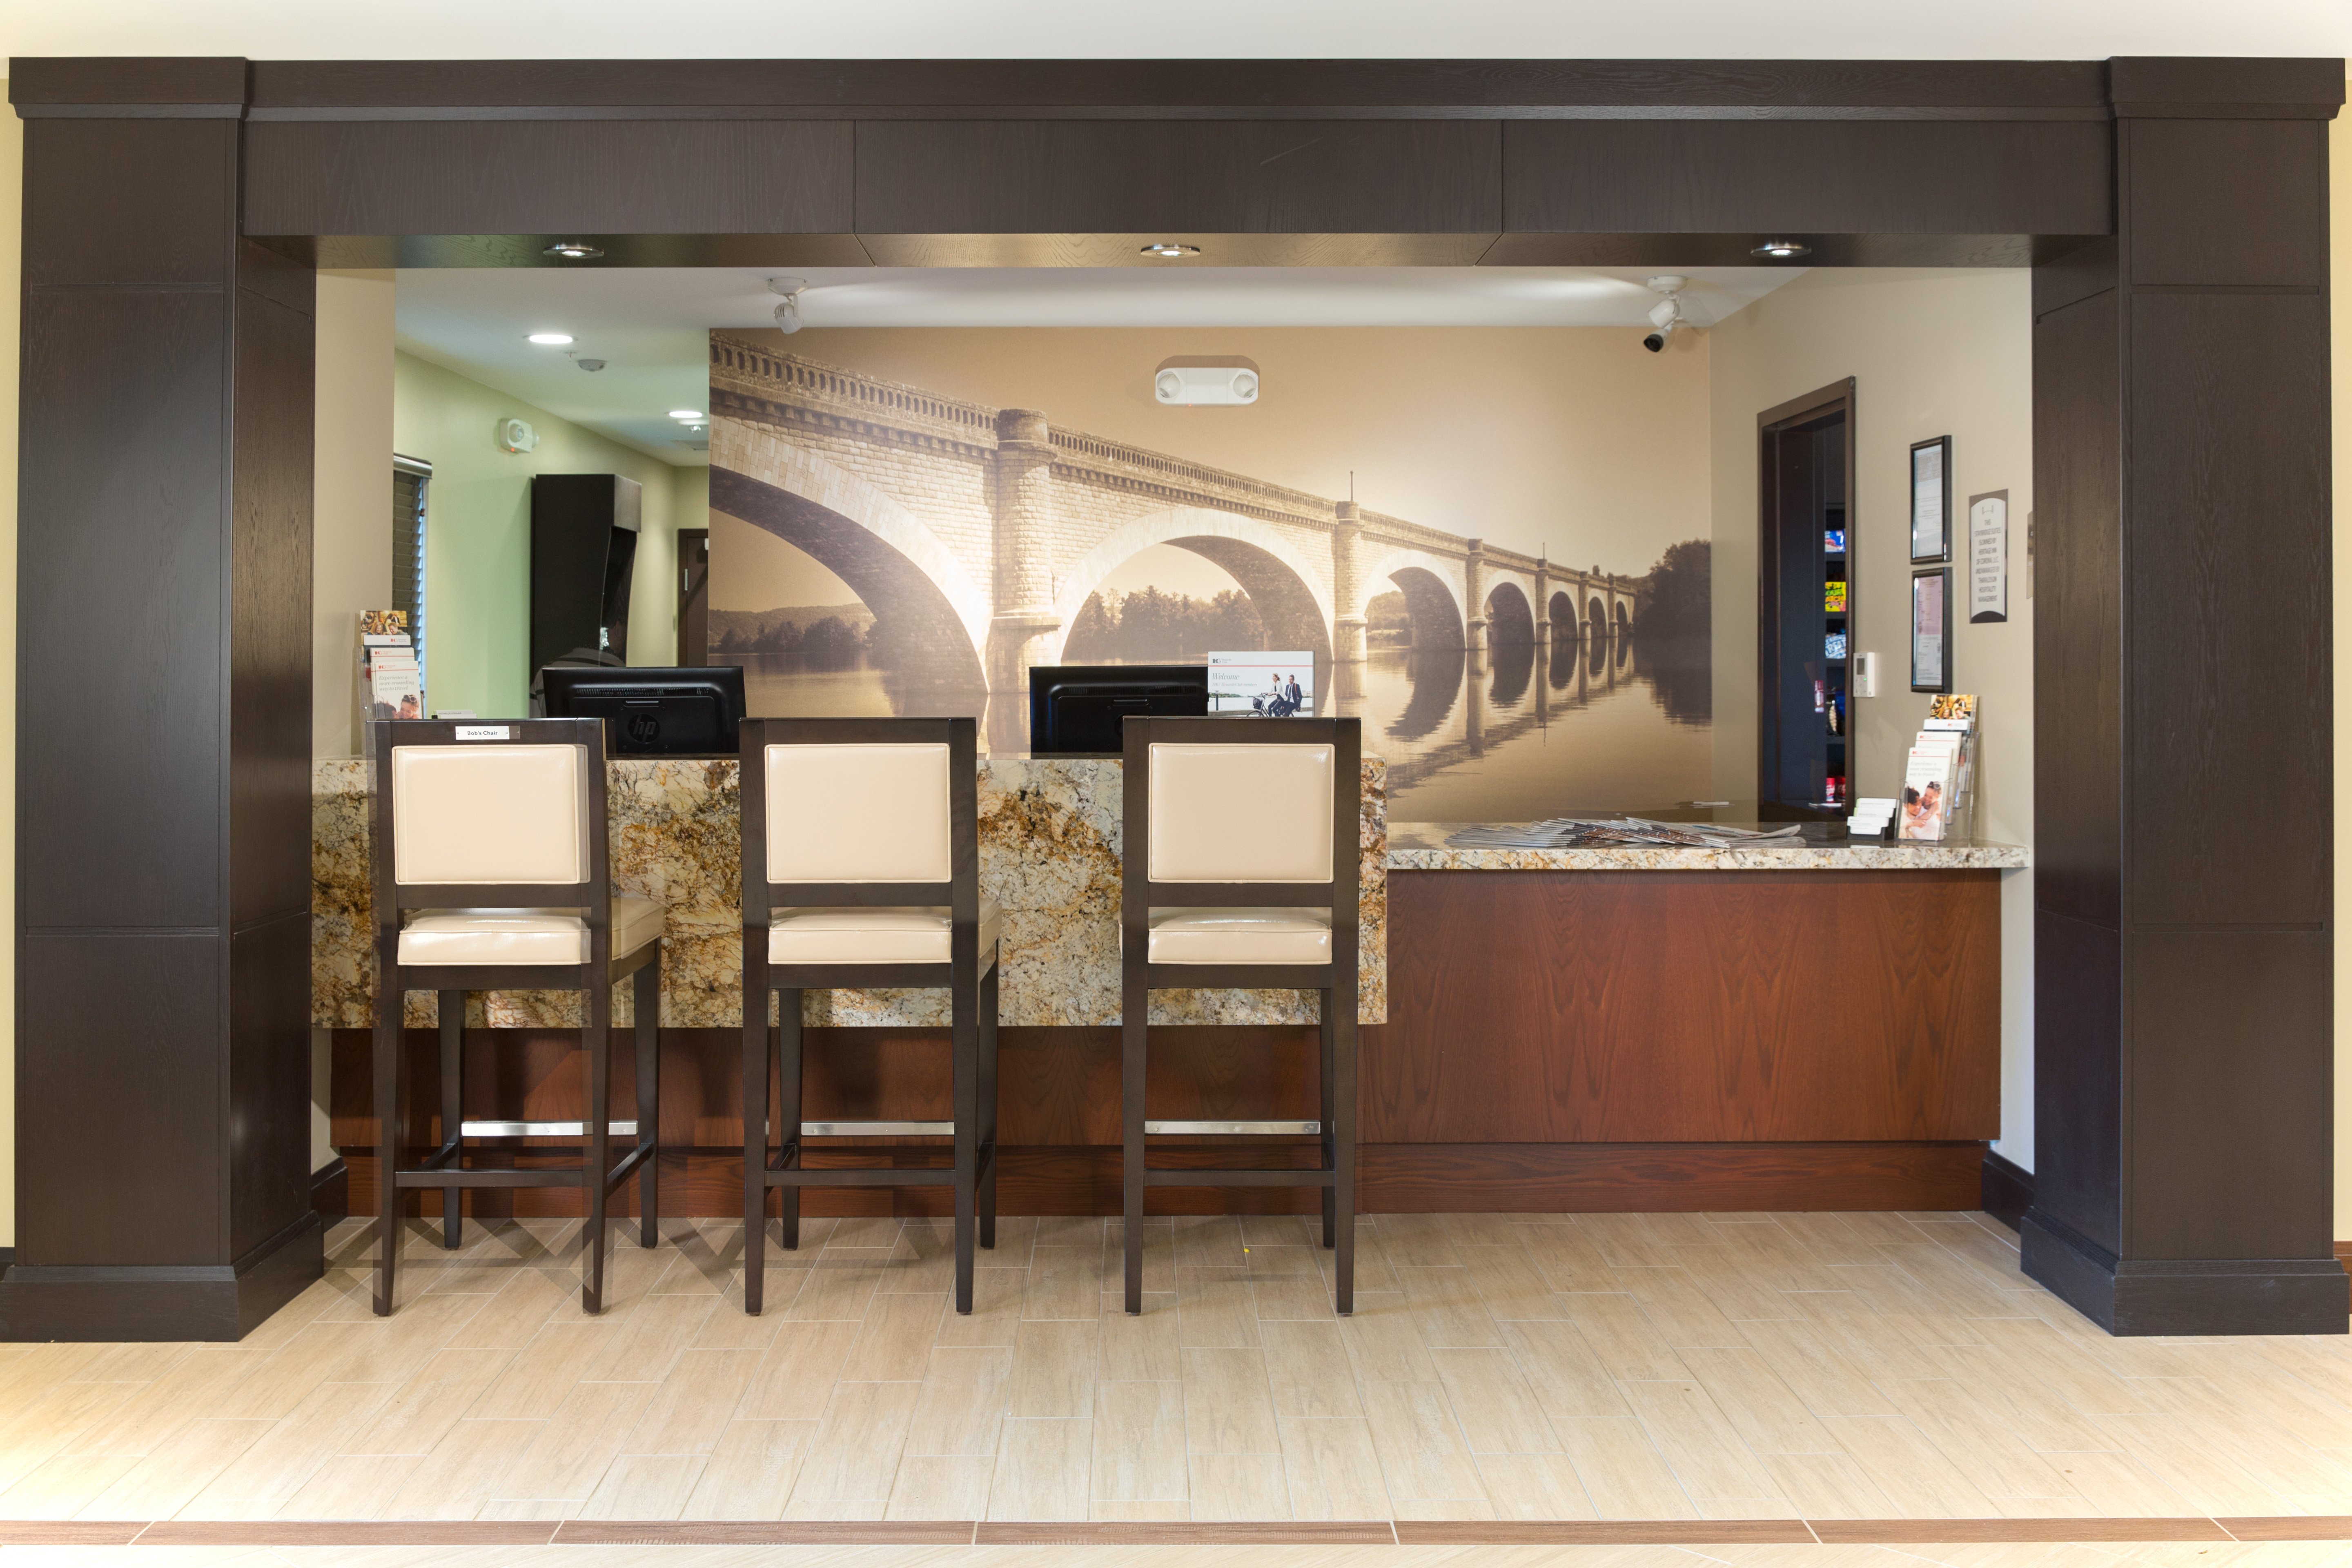 Our front desk is staffed 24 hours a day for outstanding service.